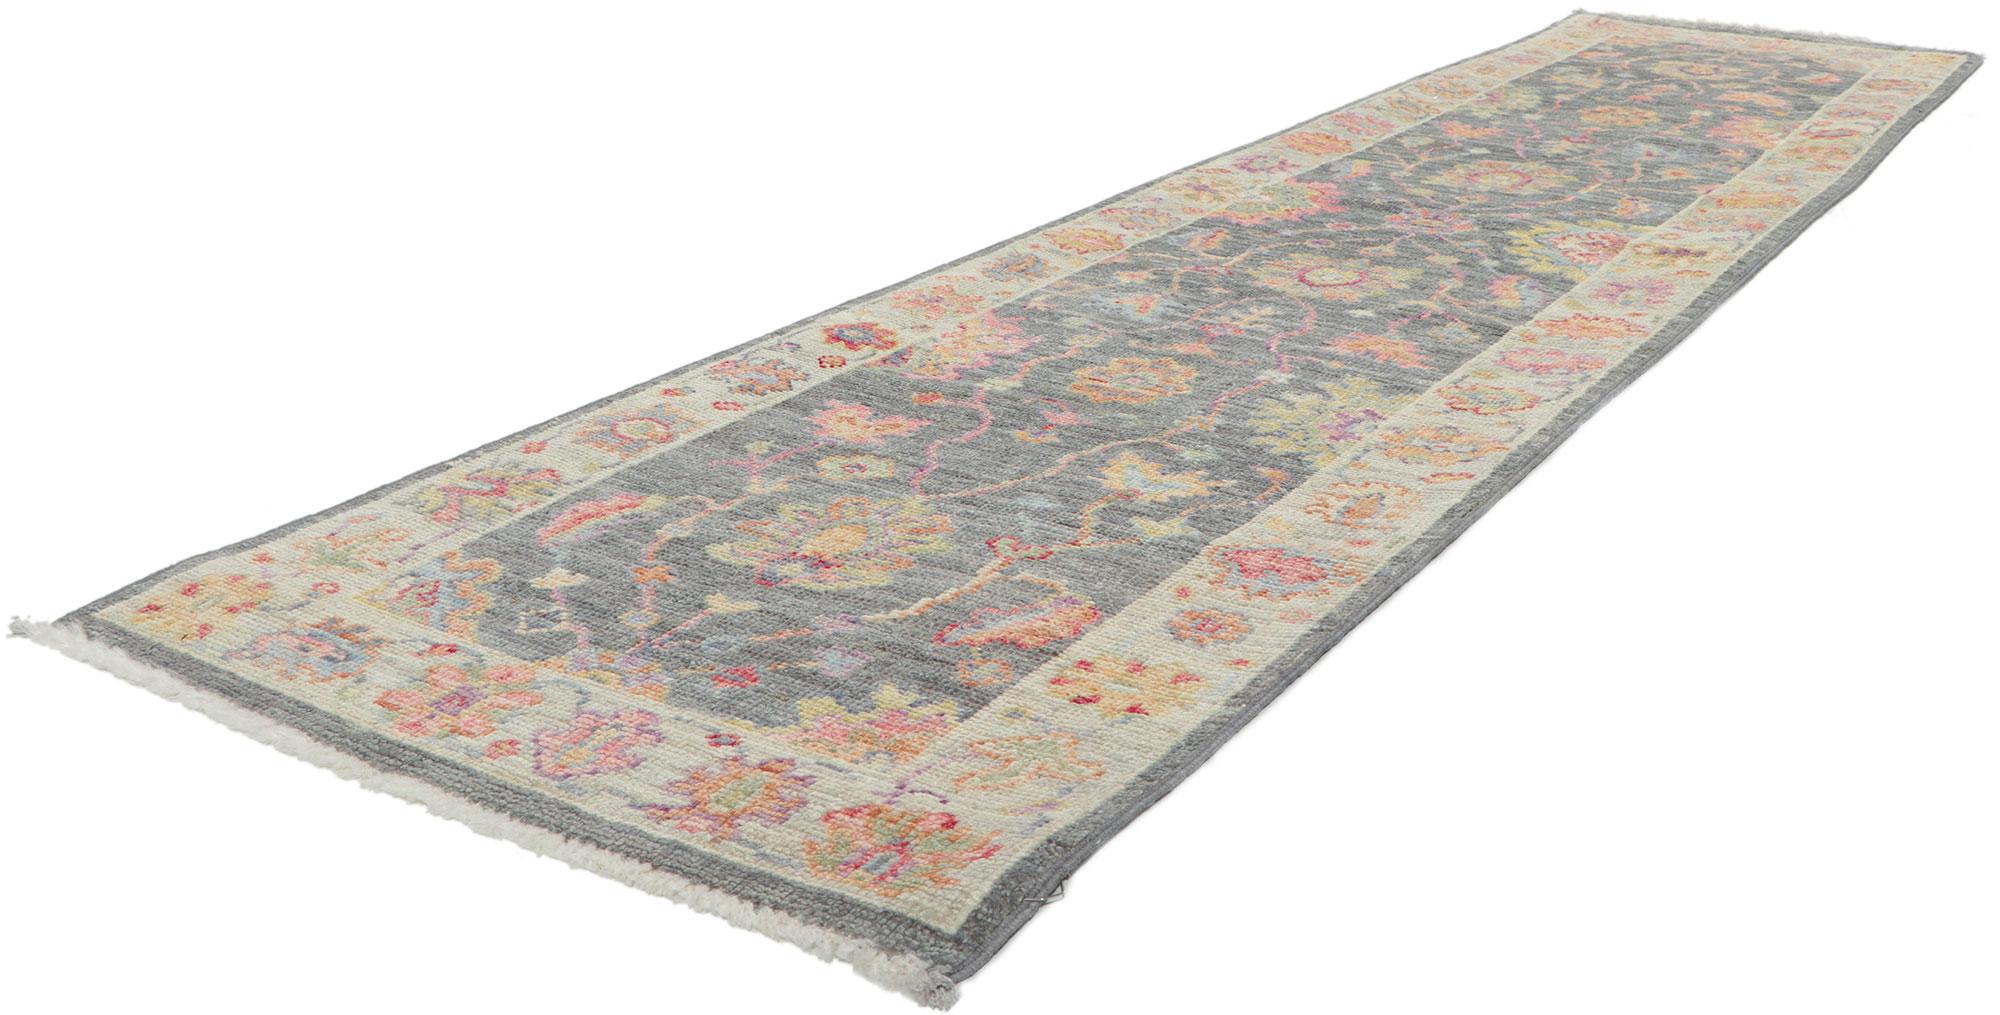 80968 New Contemporary Oushak Runner with Soft Pastel Colors,  02'04 x 10'01.